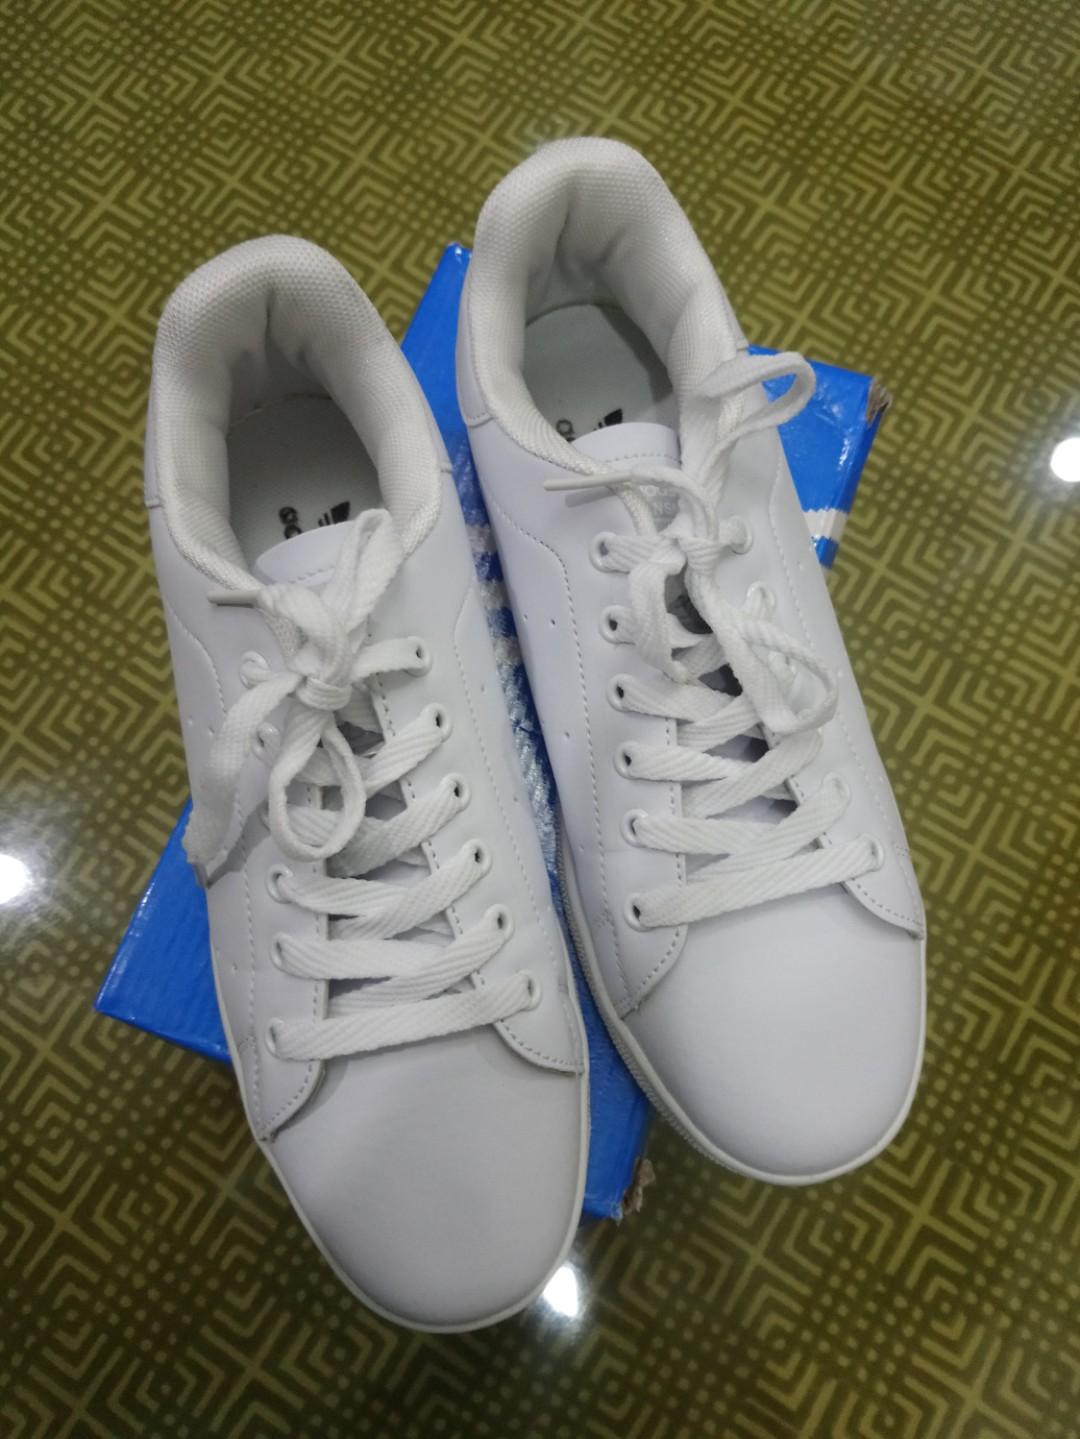 Adidas Stan Smith All White Class A Women S Fashion Footwear Sneakers On Carousell